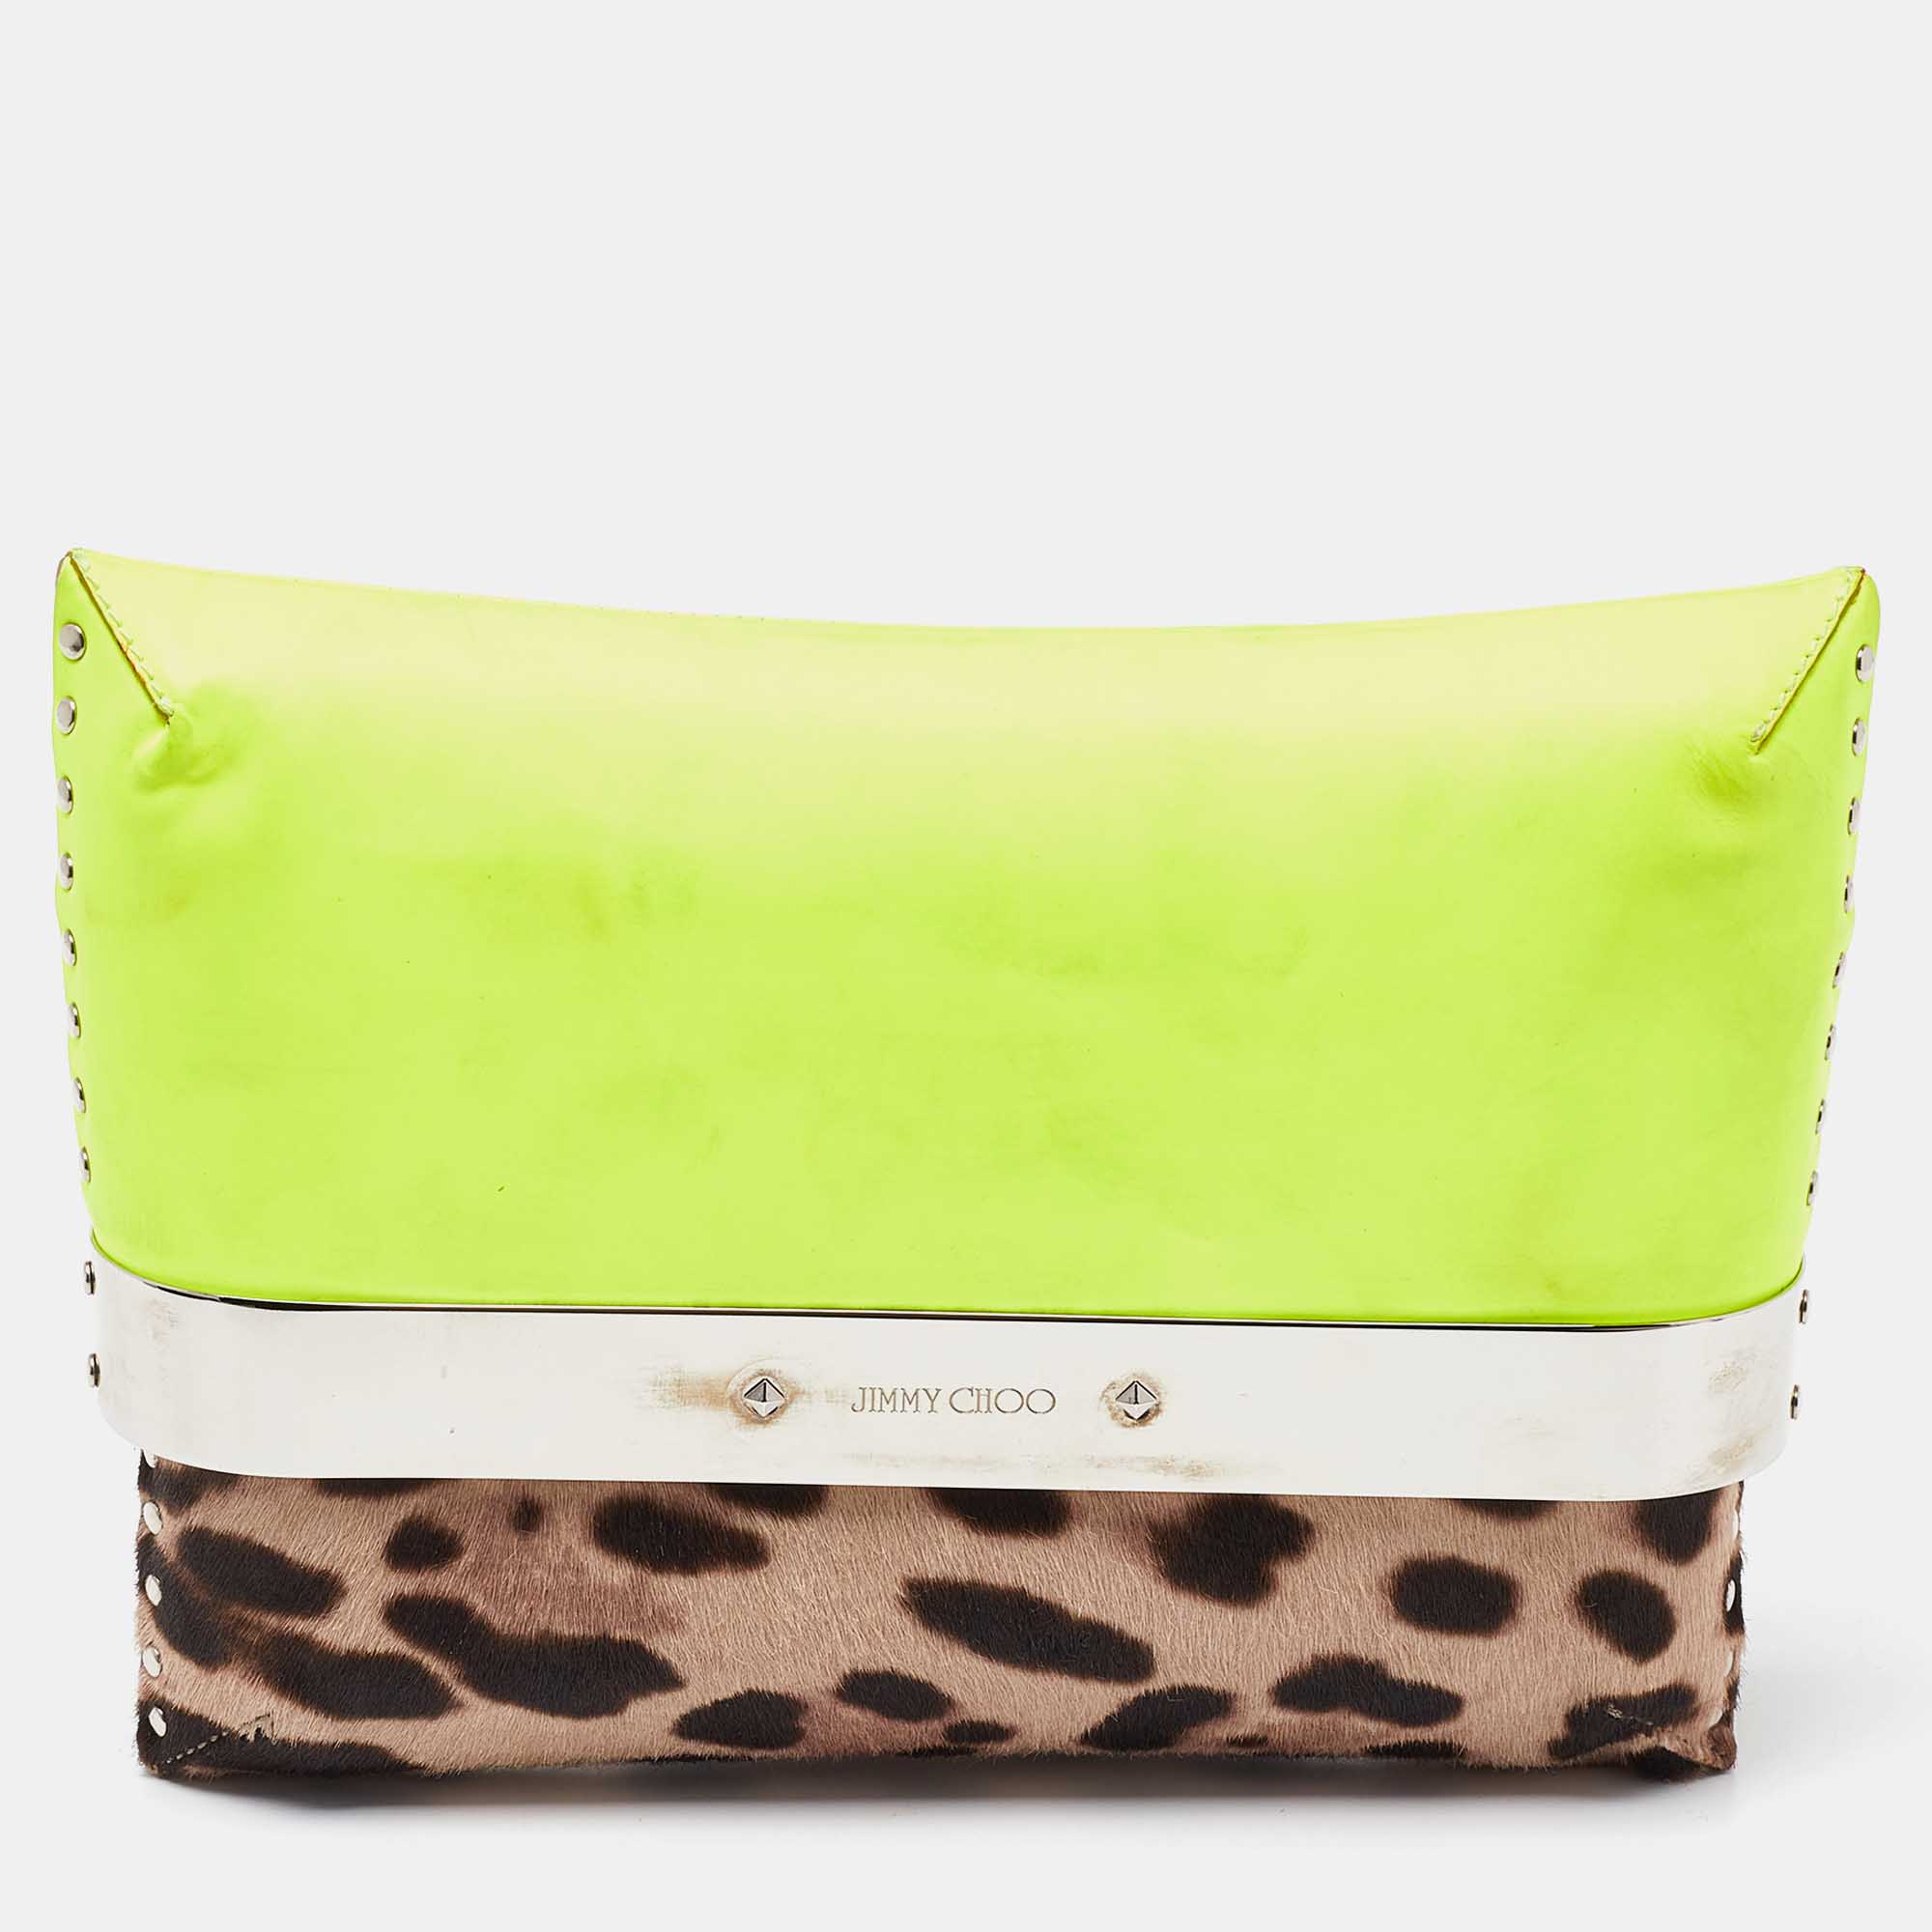 

Jimmy Choo Neon/Brown Leopard Print Calfhair and Patent Leather Clutch, Green